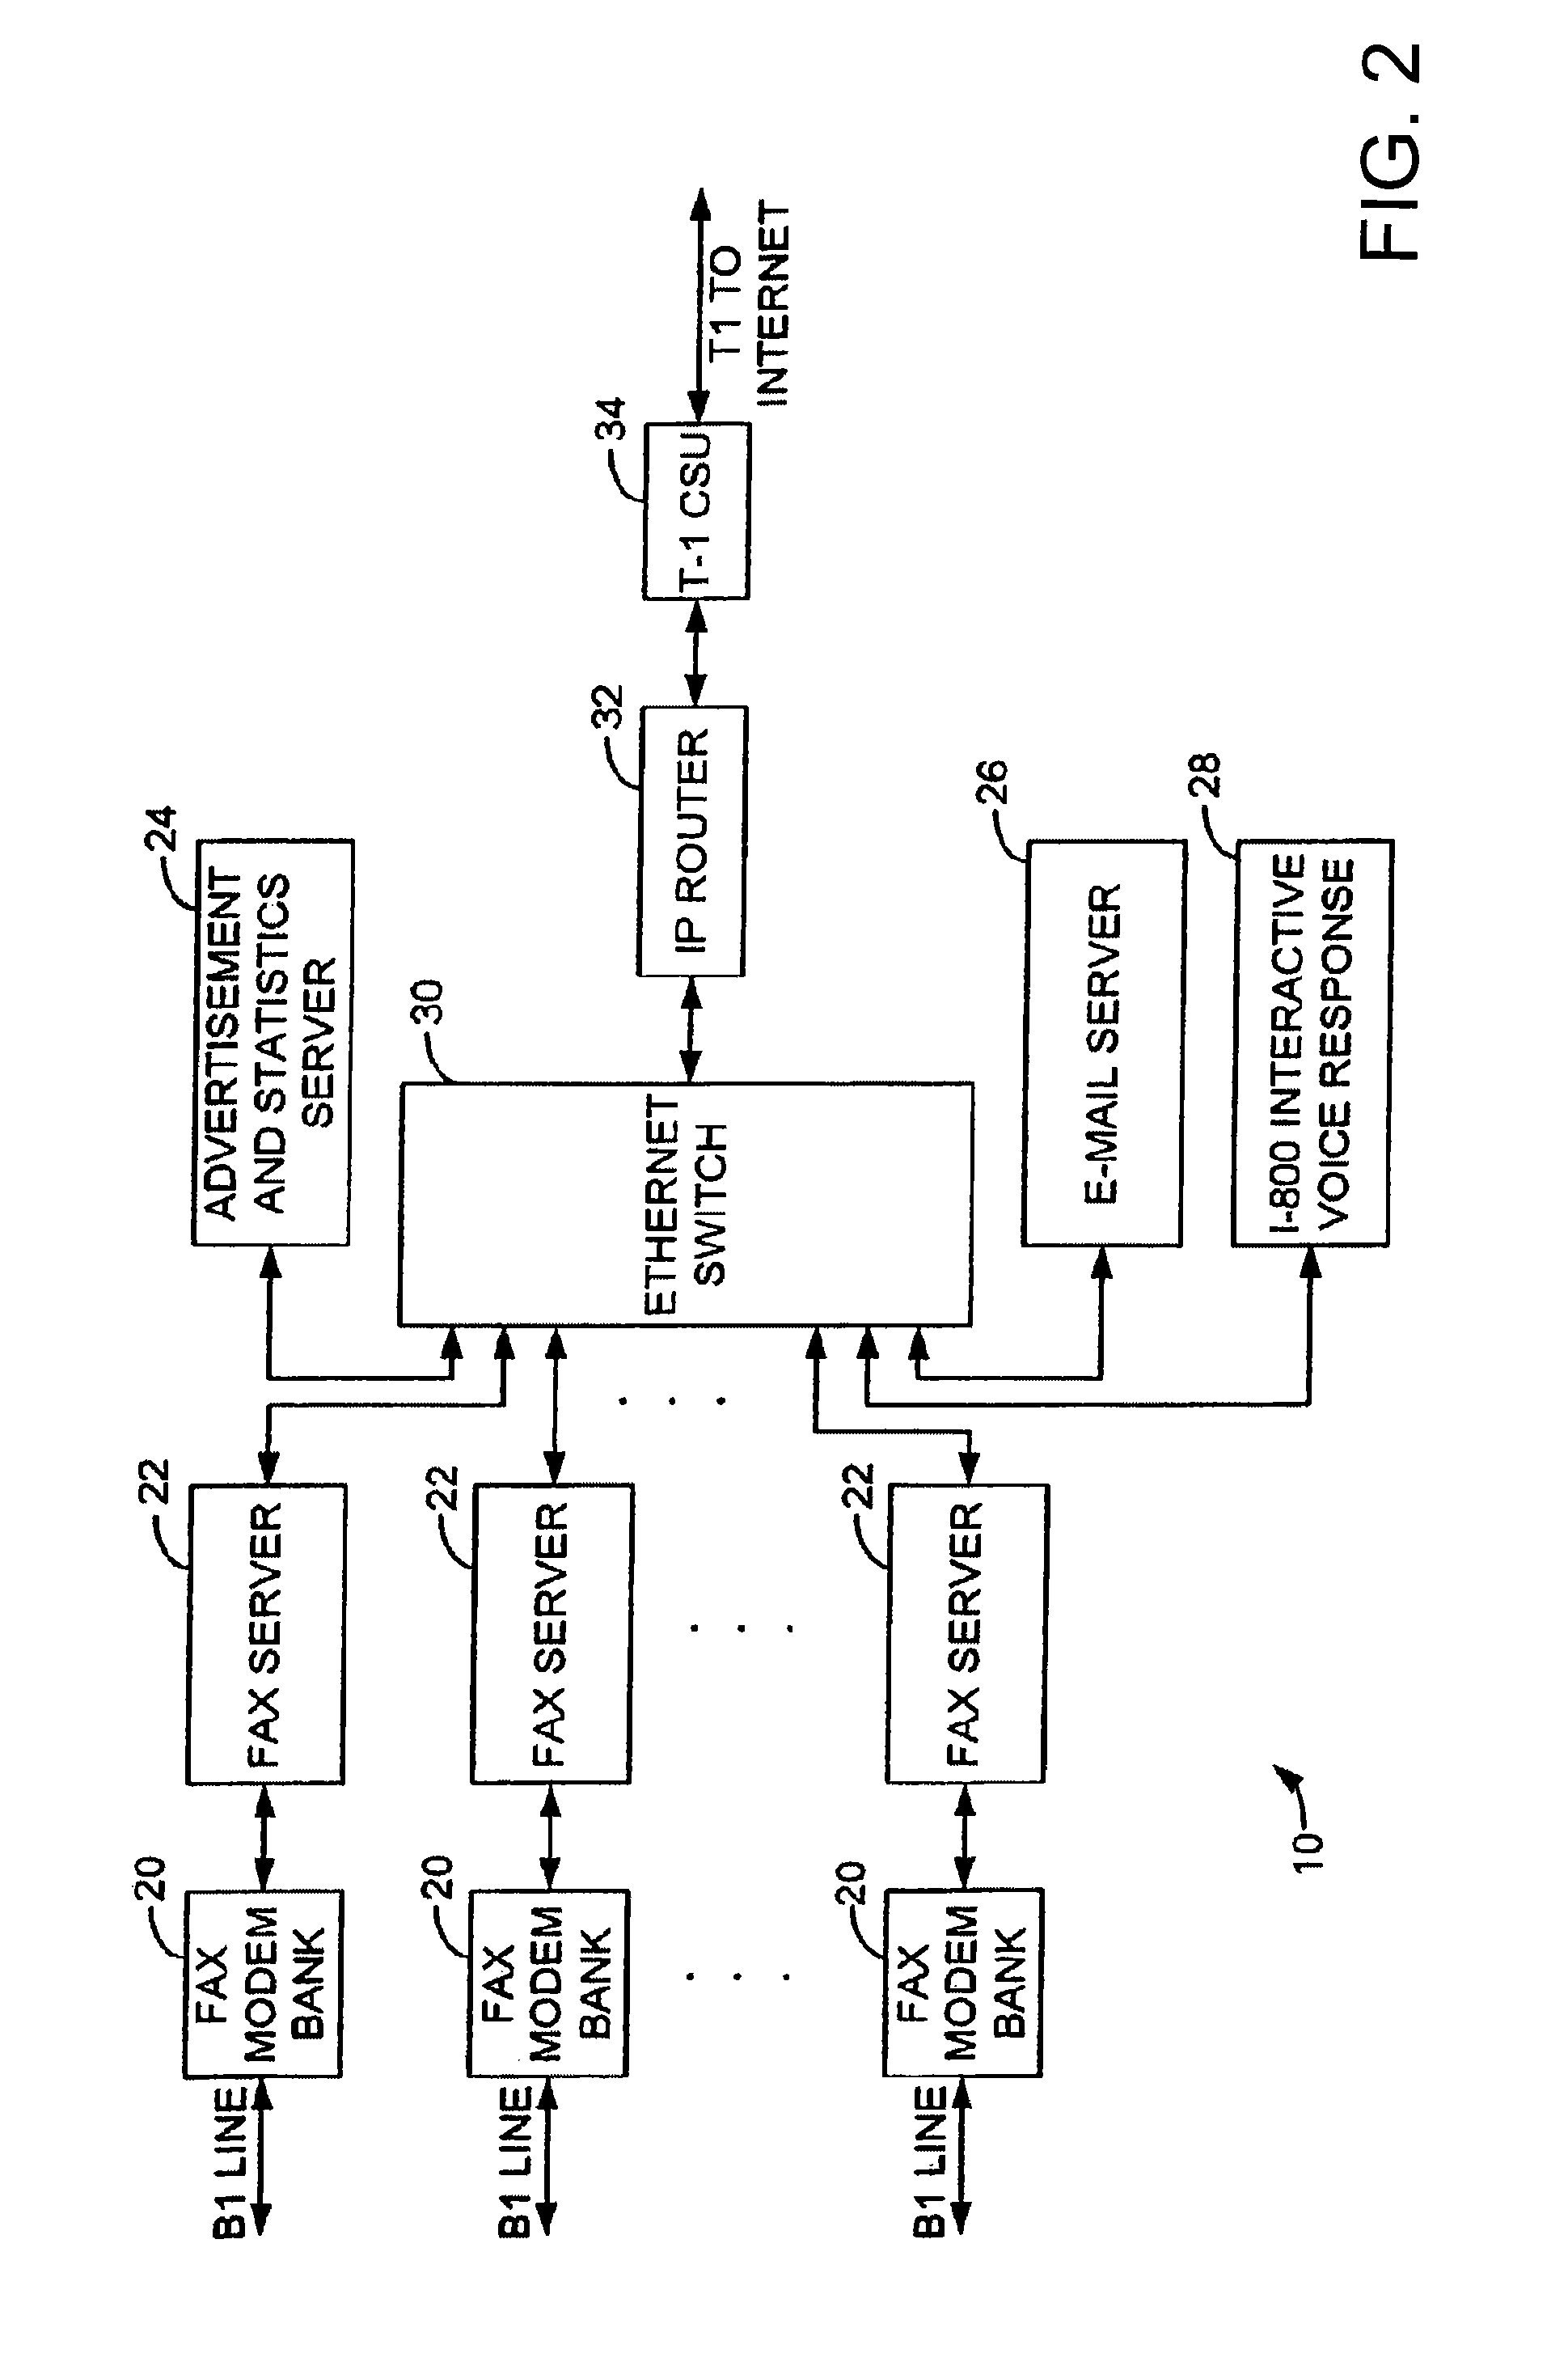 Method and system for modified document transfer via computer network transfer protocols